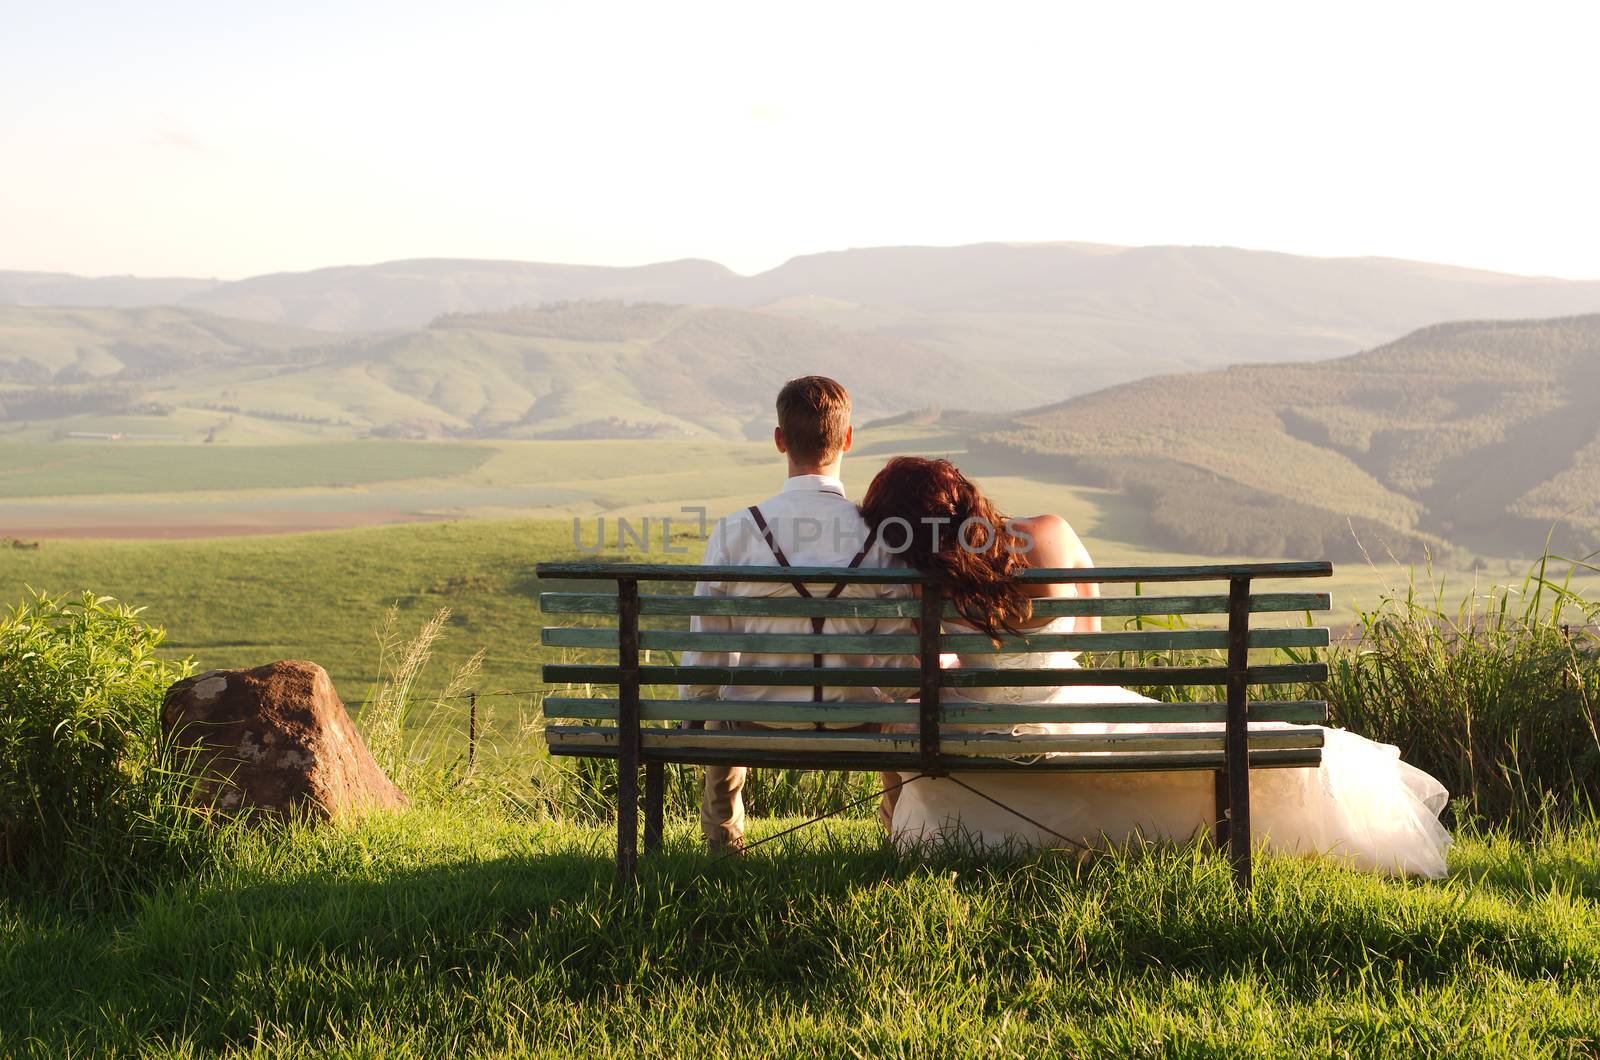 African bride and groom on bench with landscape by alistaircotton